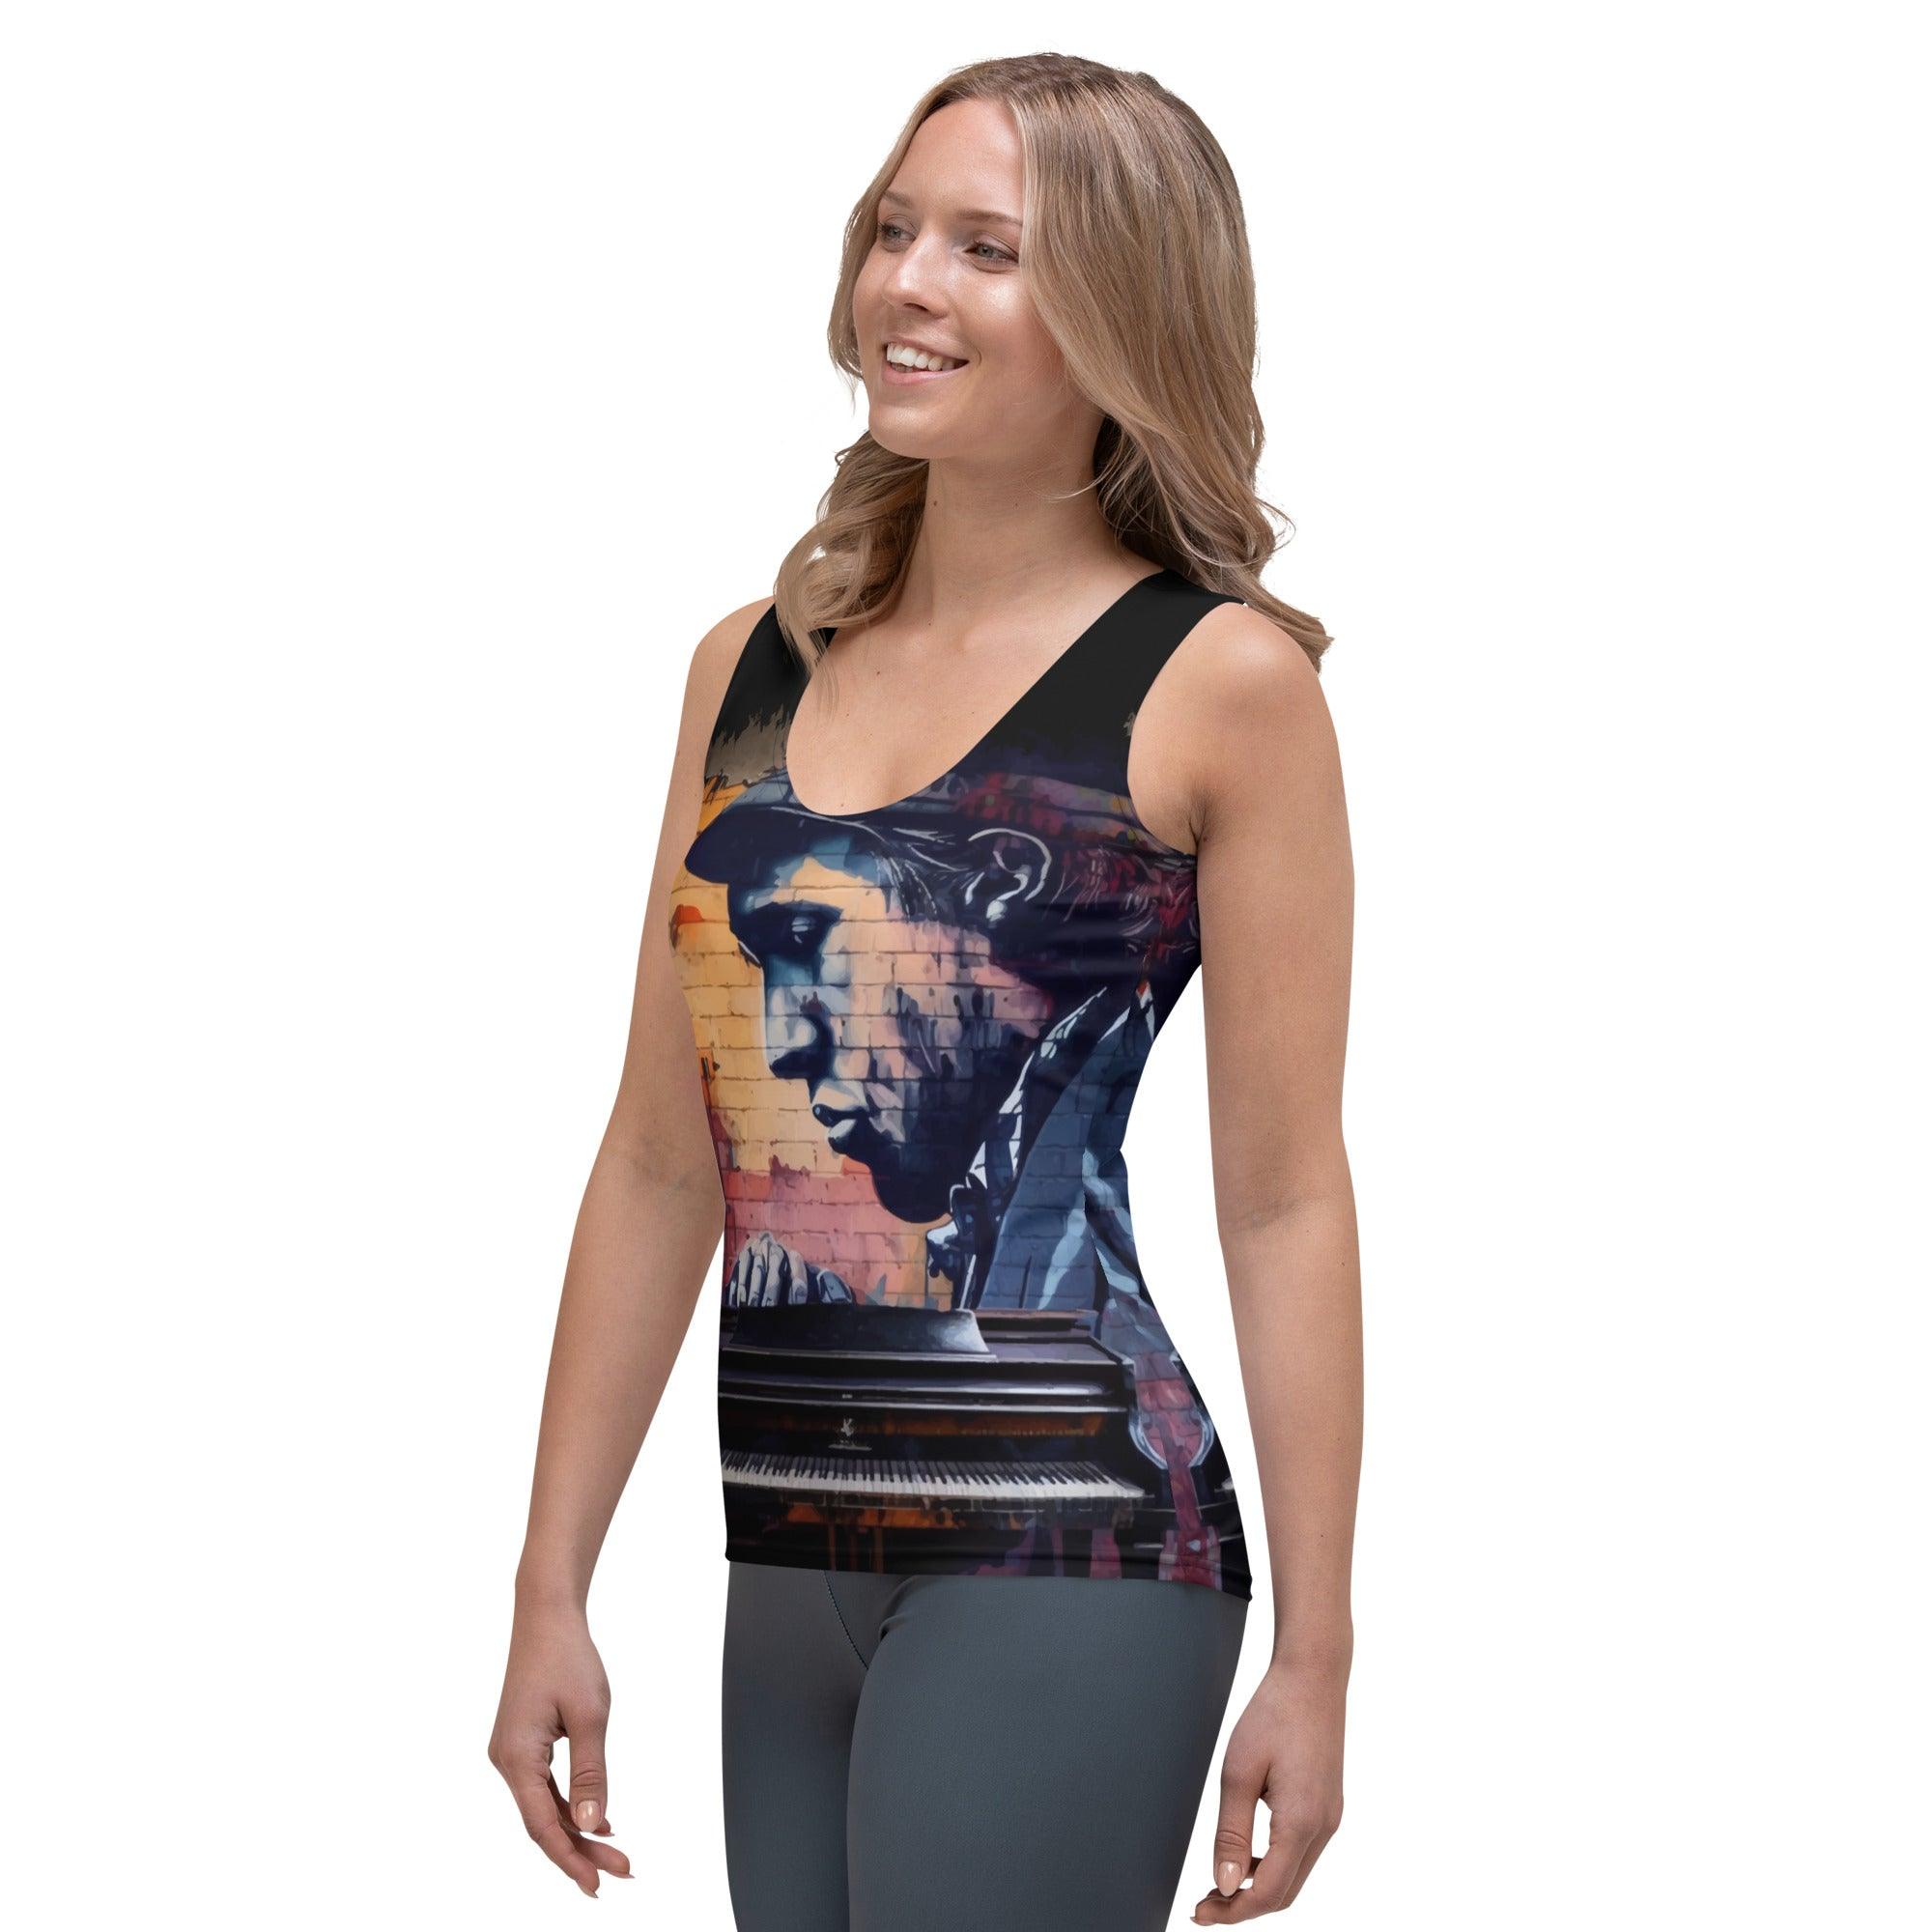 Ticklin' the Piano Sublimation Cut & Sew Tank Top - Beyond T-shirts